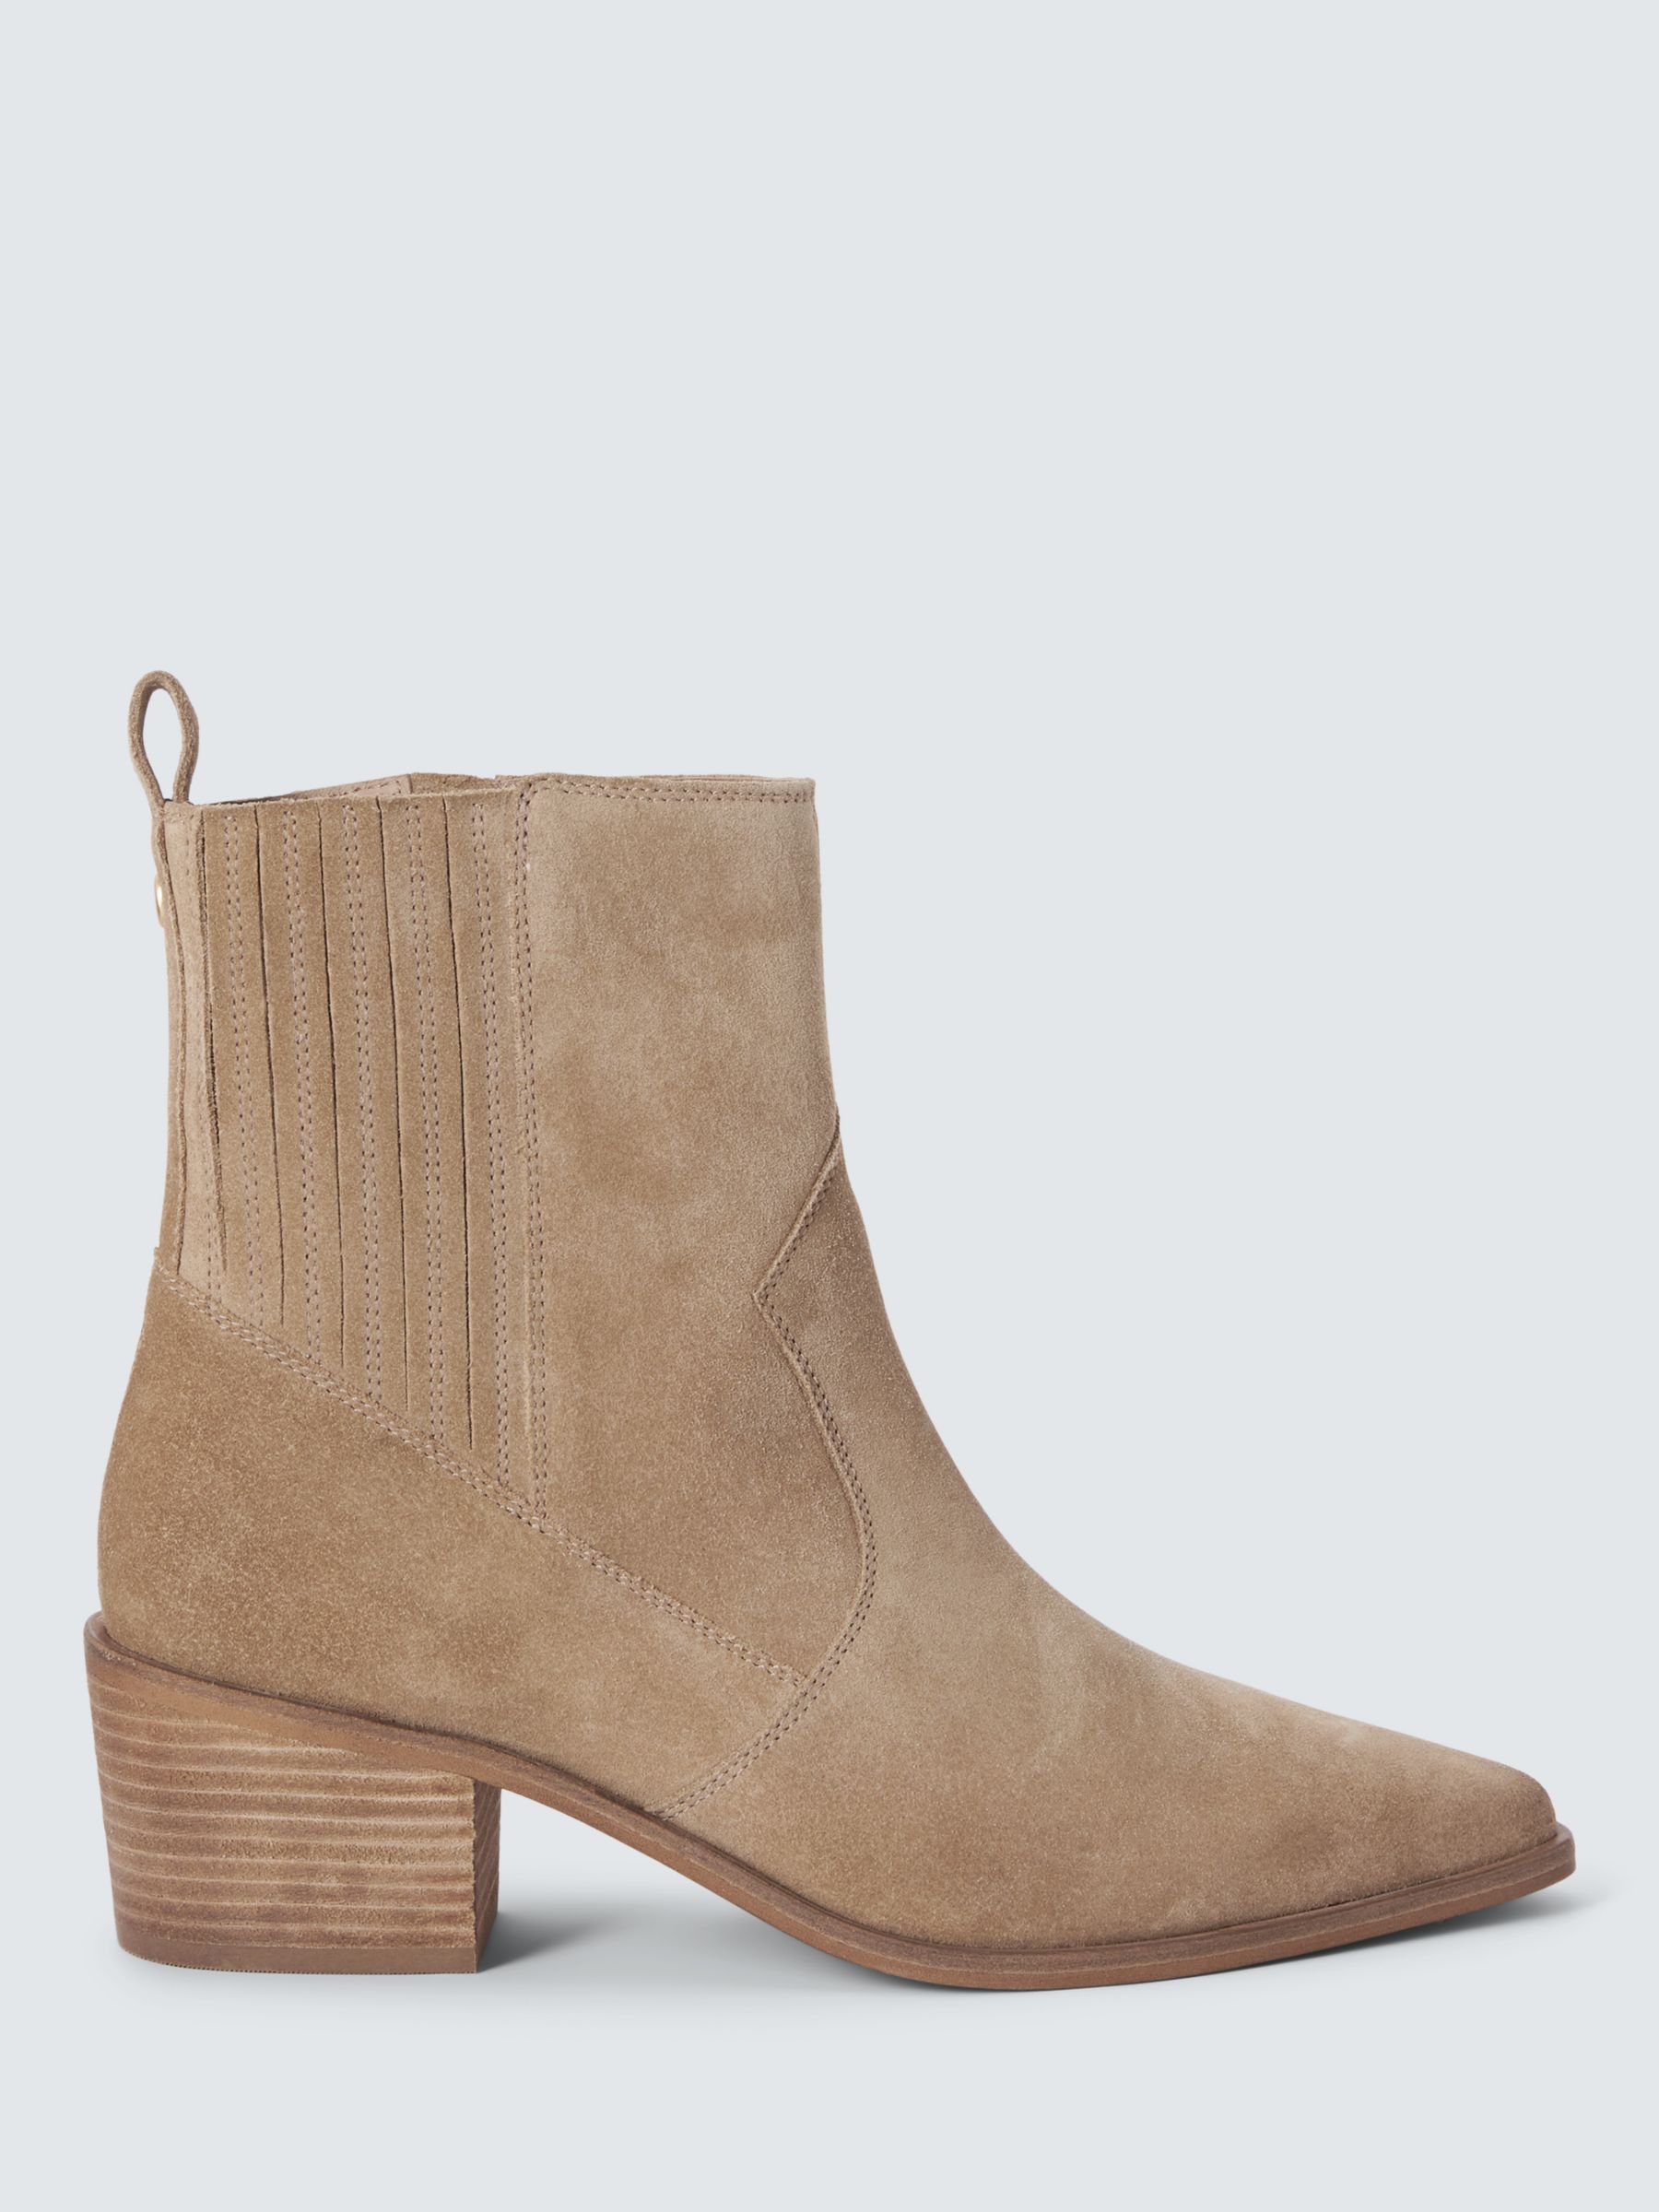 AND/OR Pixie Suede Heeled Chelsea Western Boots, Sand, 3